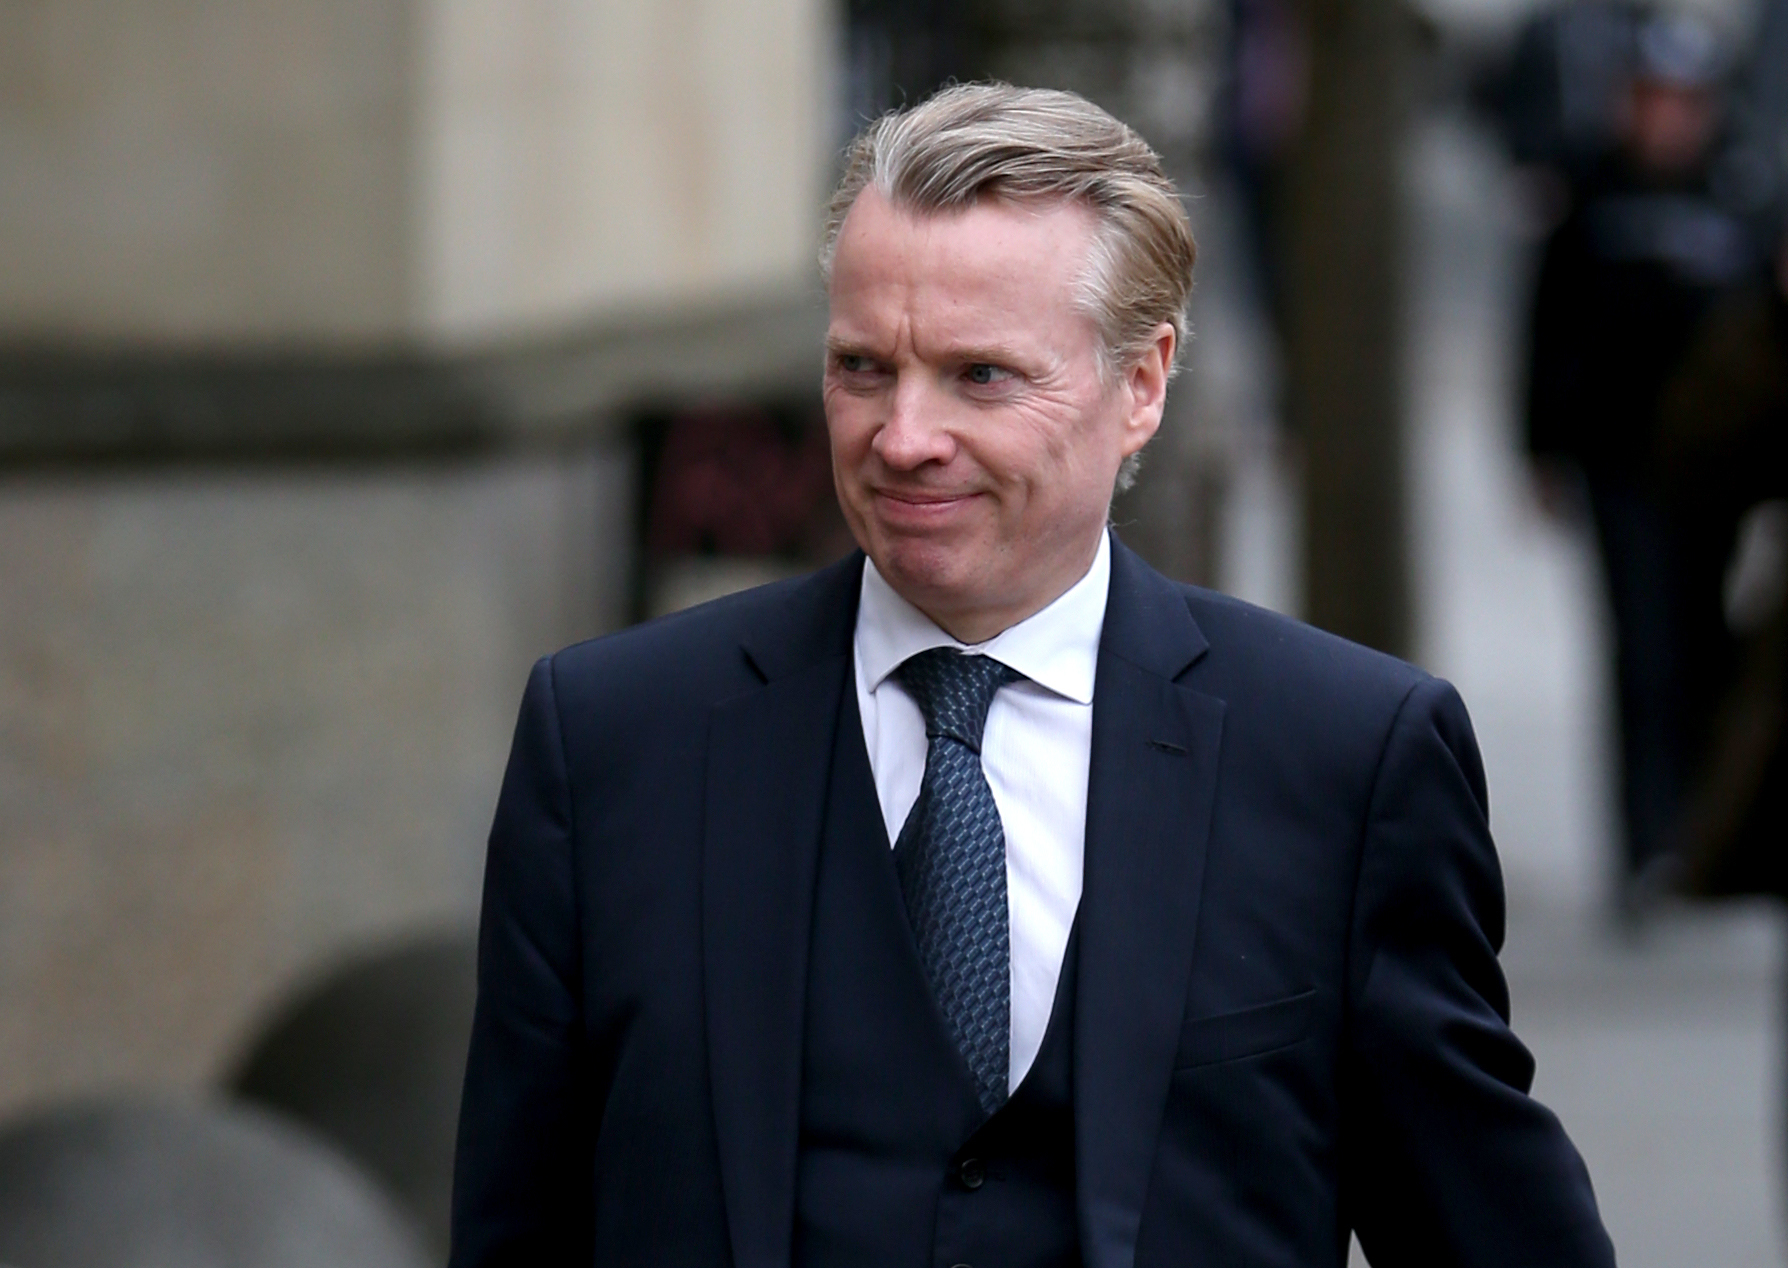 Craig Whyte arrives at the High Court in Glasgow, the former Rangers owner is on trial accused of acquiring the club fraudulently in May 2011. (Jane Barlow/PA Wire)